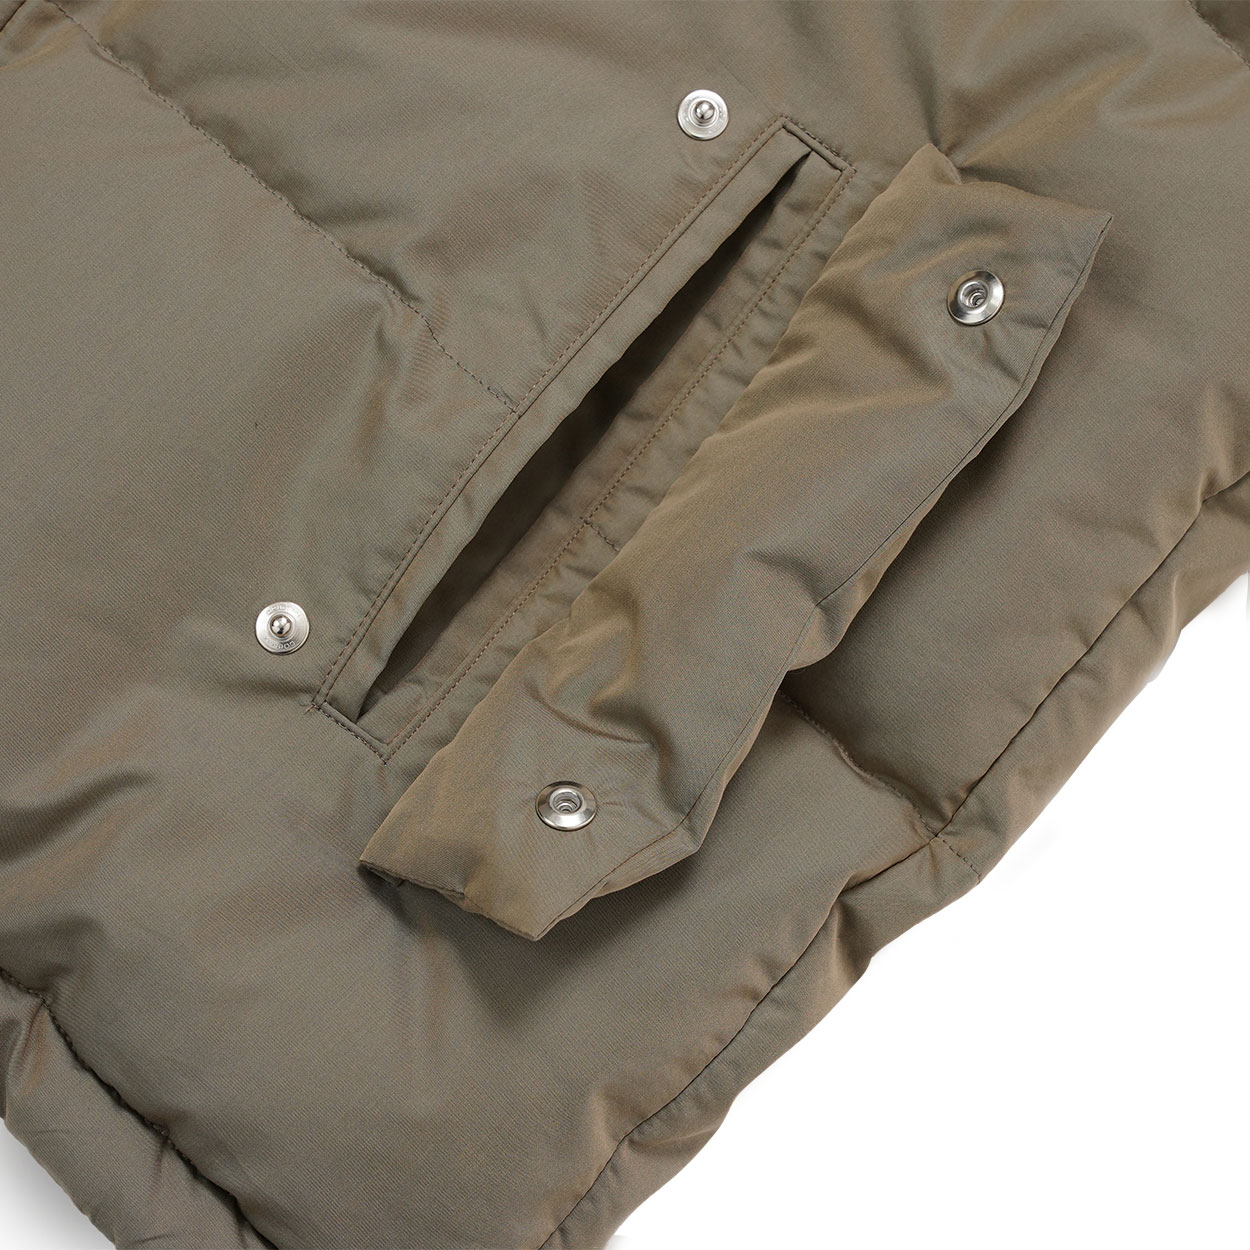 Finx Chambray Down Coat in Olive Khaki – Outline Brooklyn